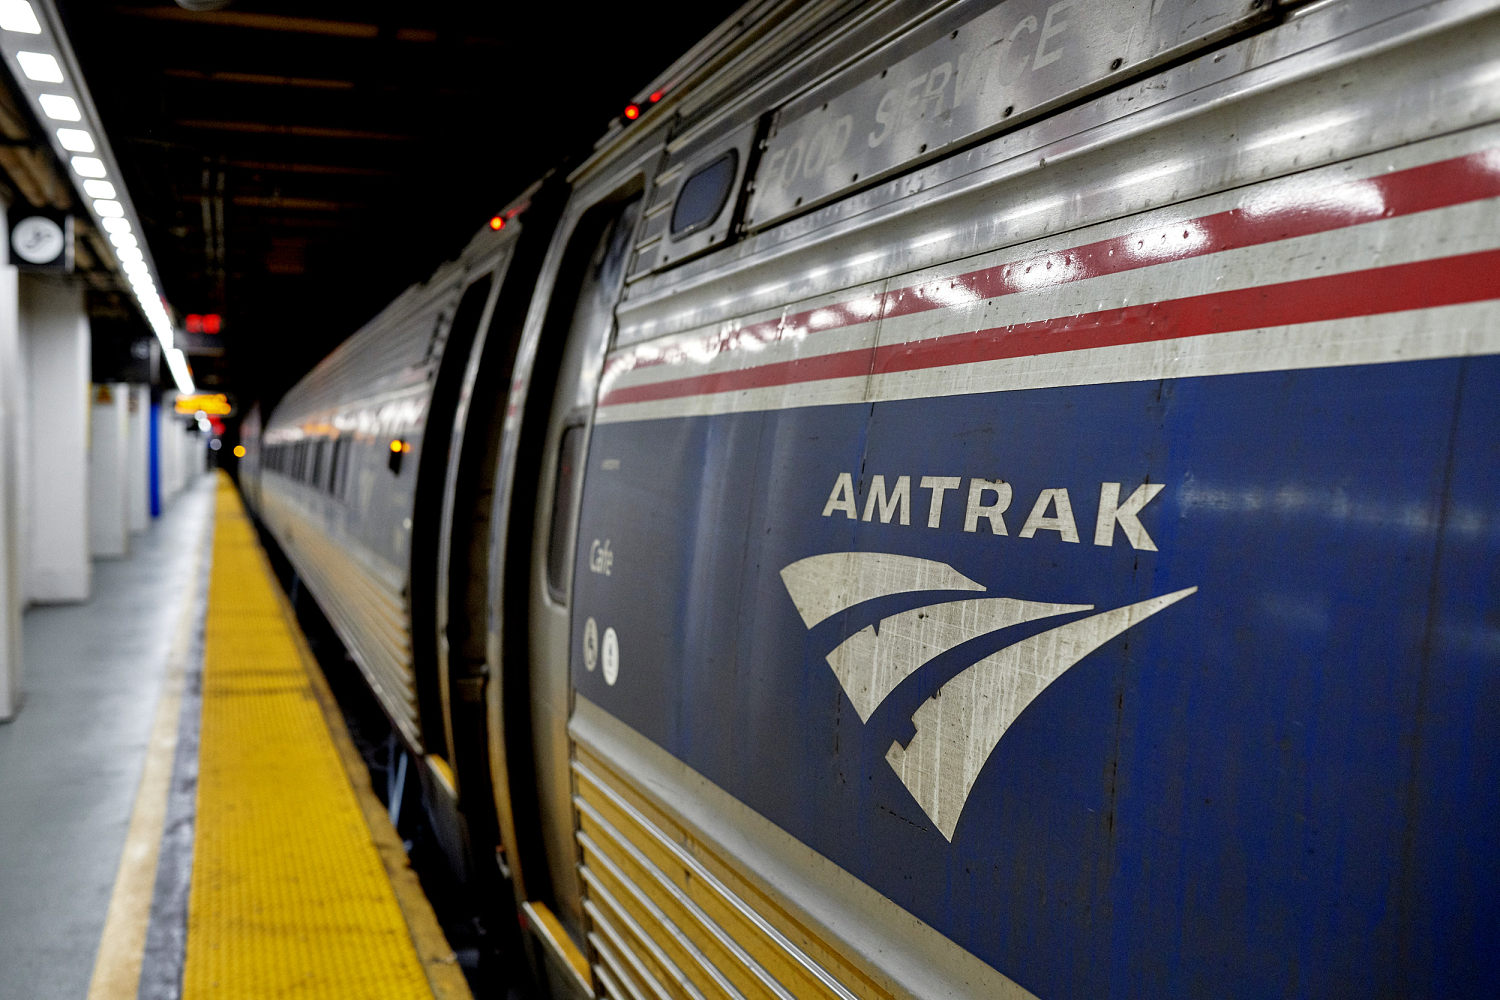 Amtrak services between New York and Boston resume after suspension